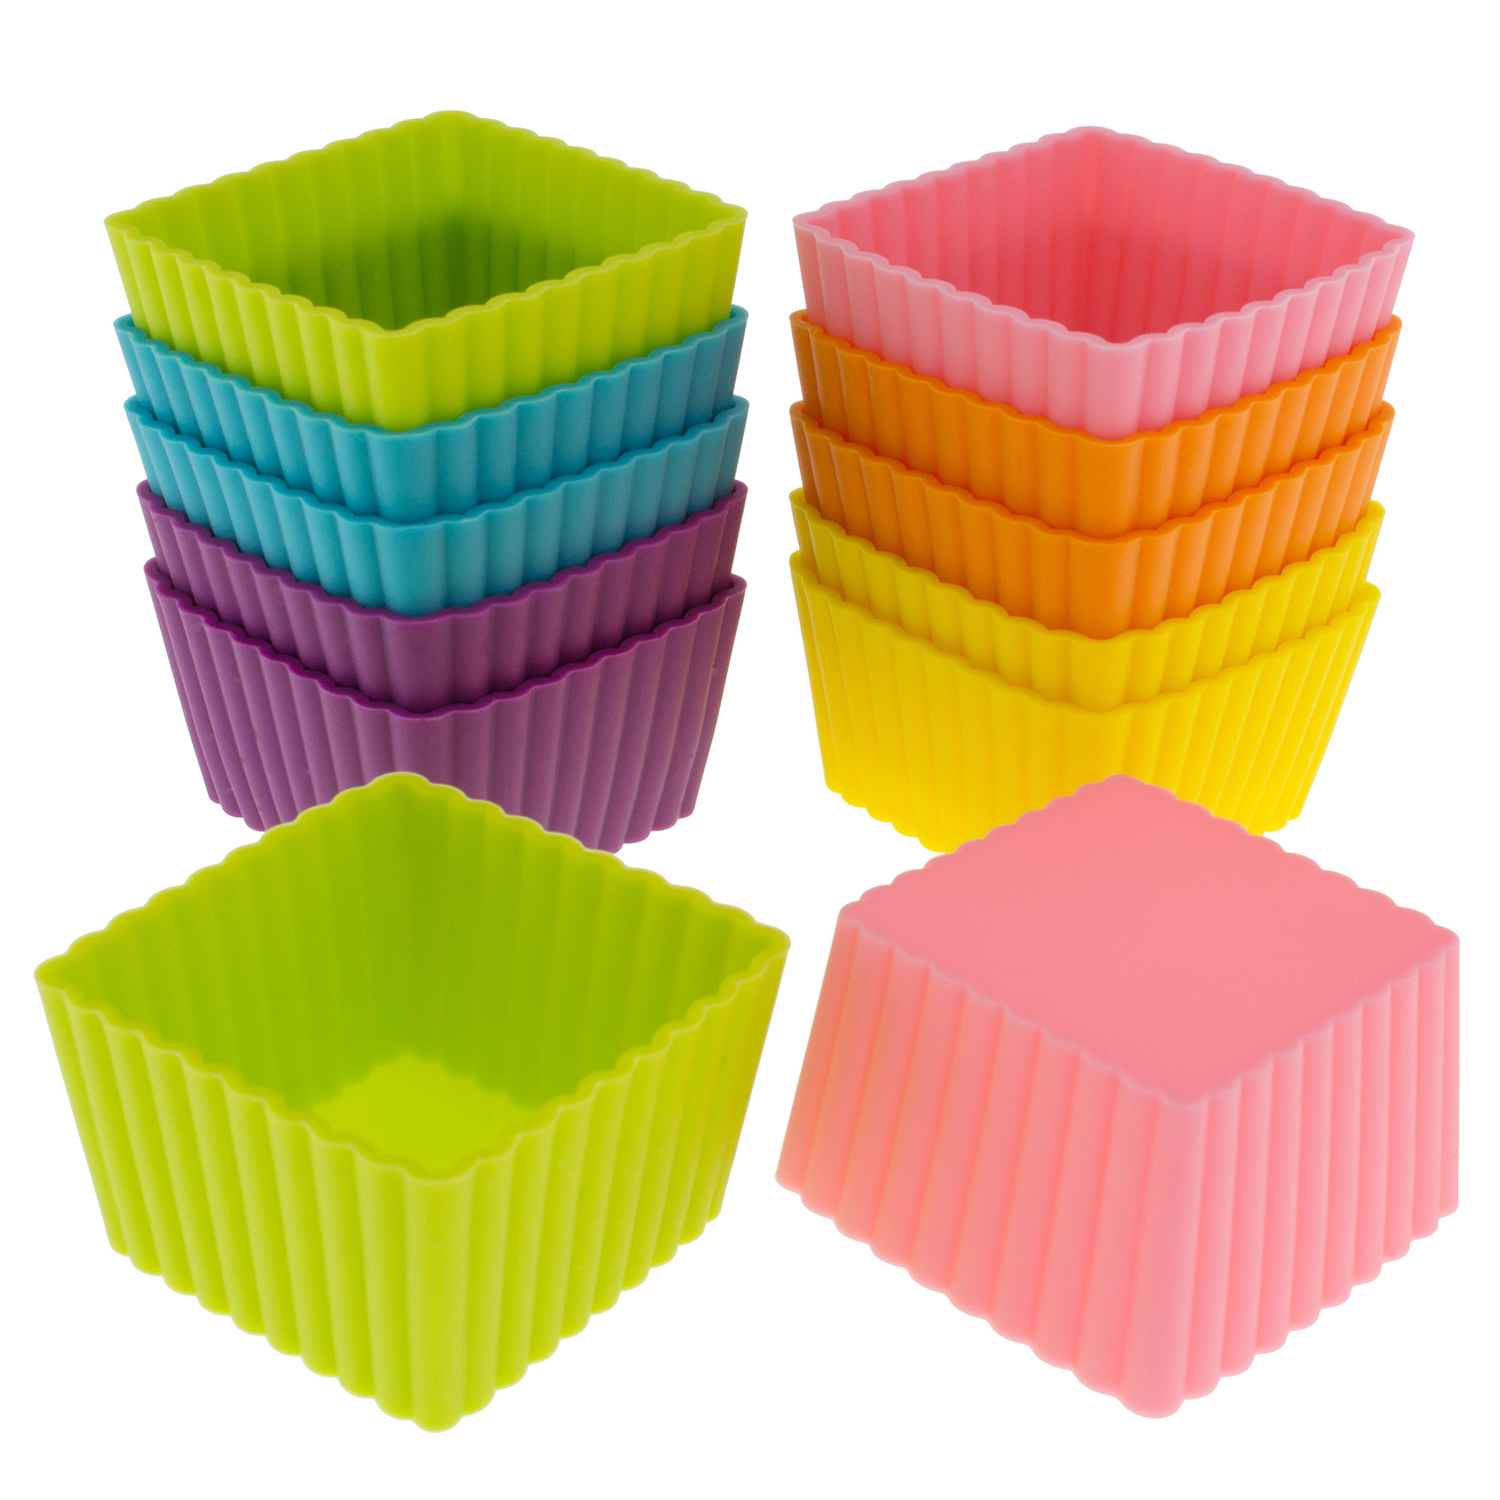 Freshware Silicone Cupcake Liners / Baking Cups - 12-Pack Muffin Molds, 1-6/8 inch Square, Six Vibrant Colors